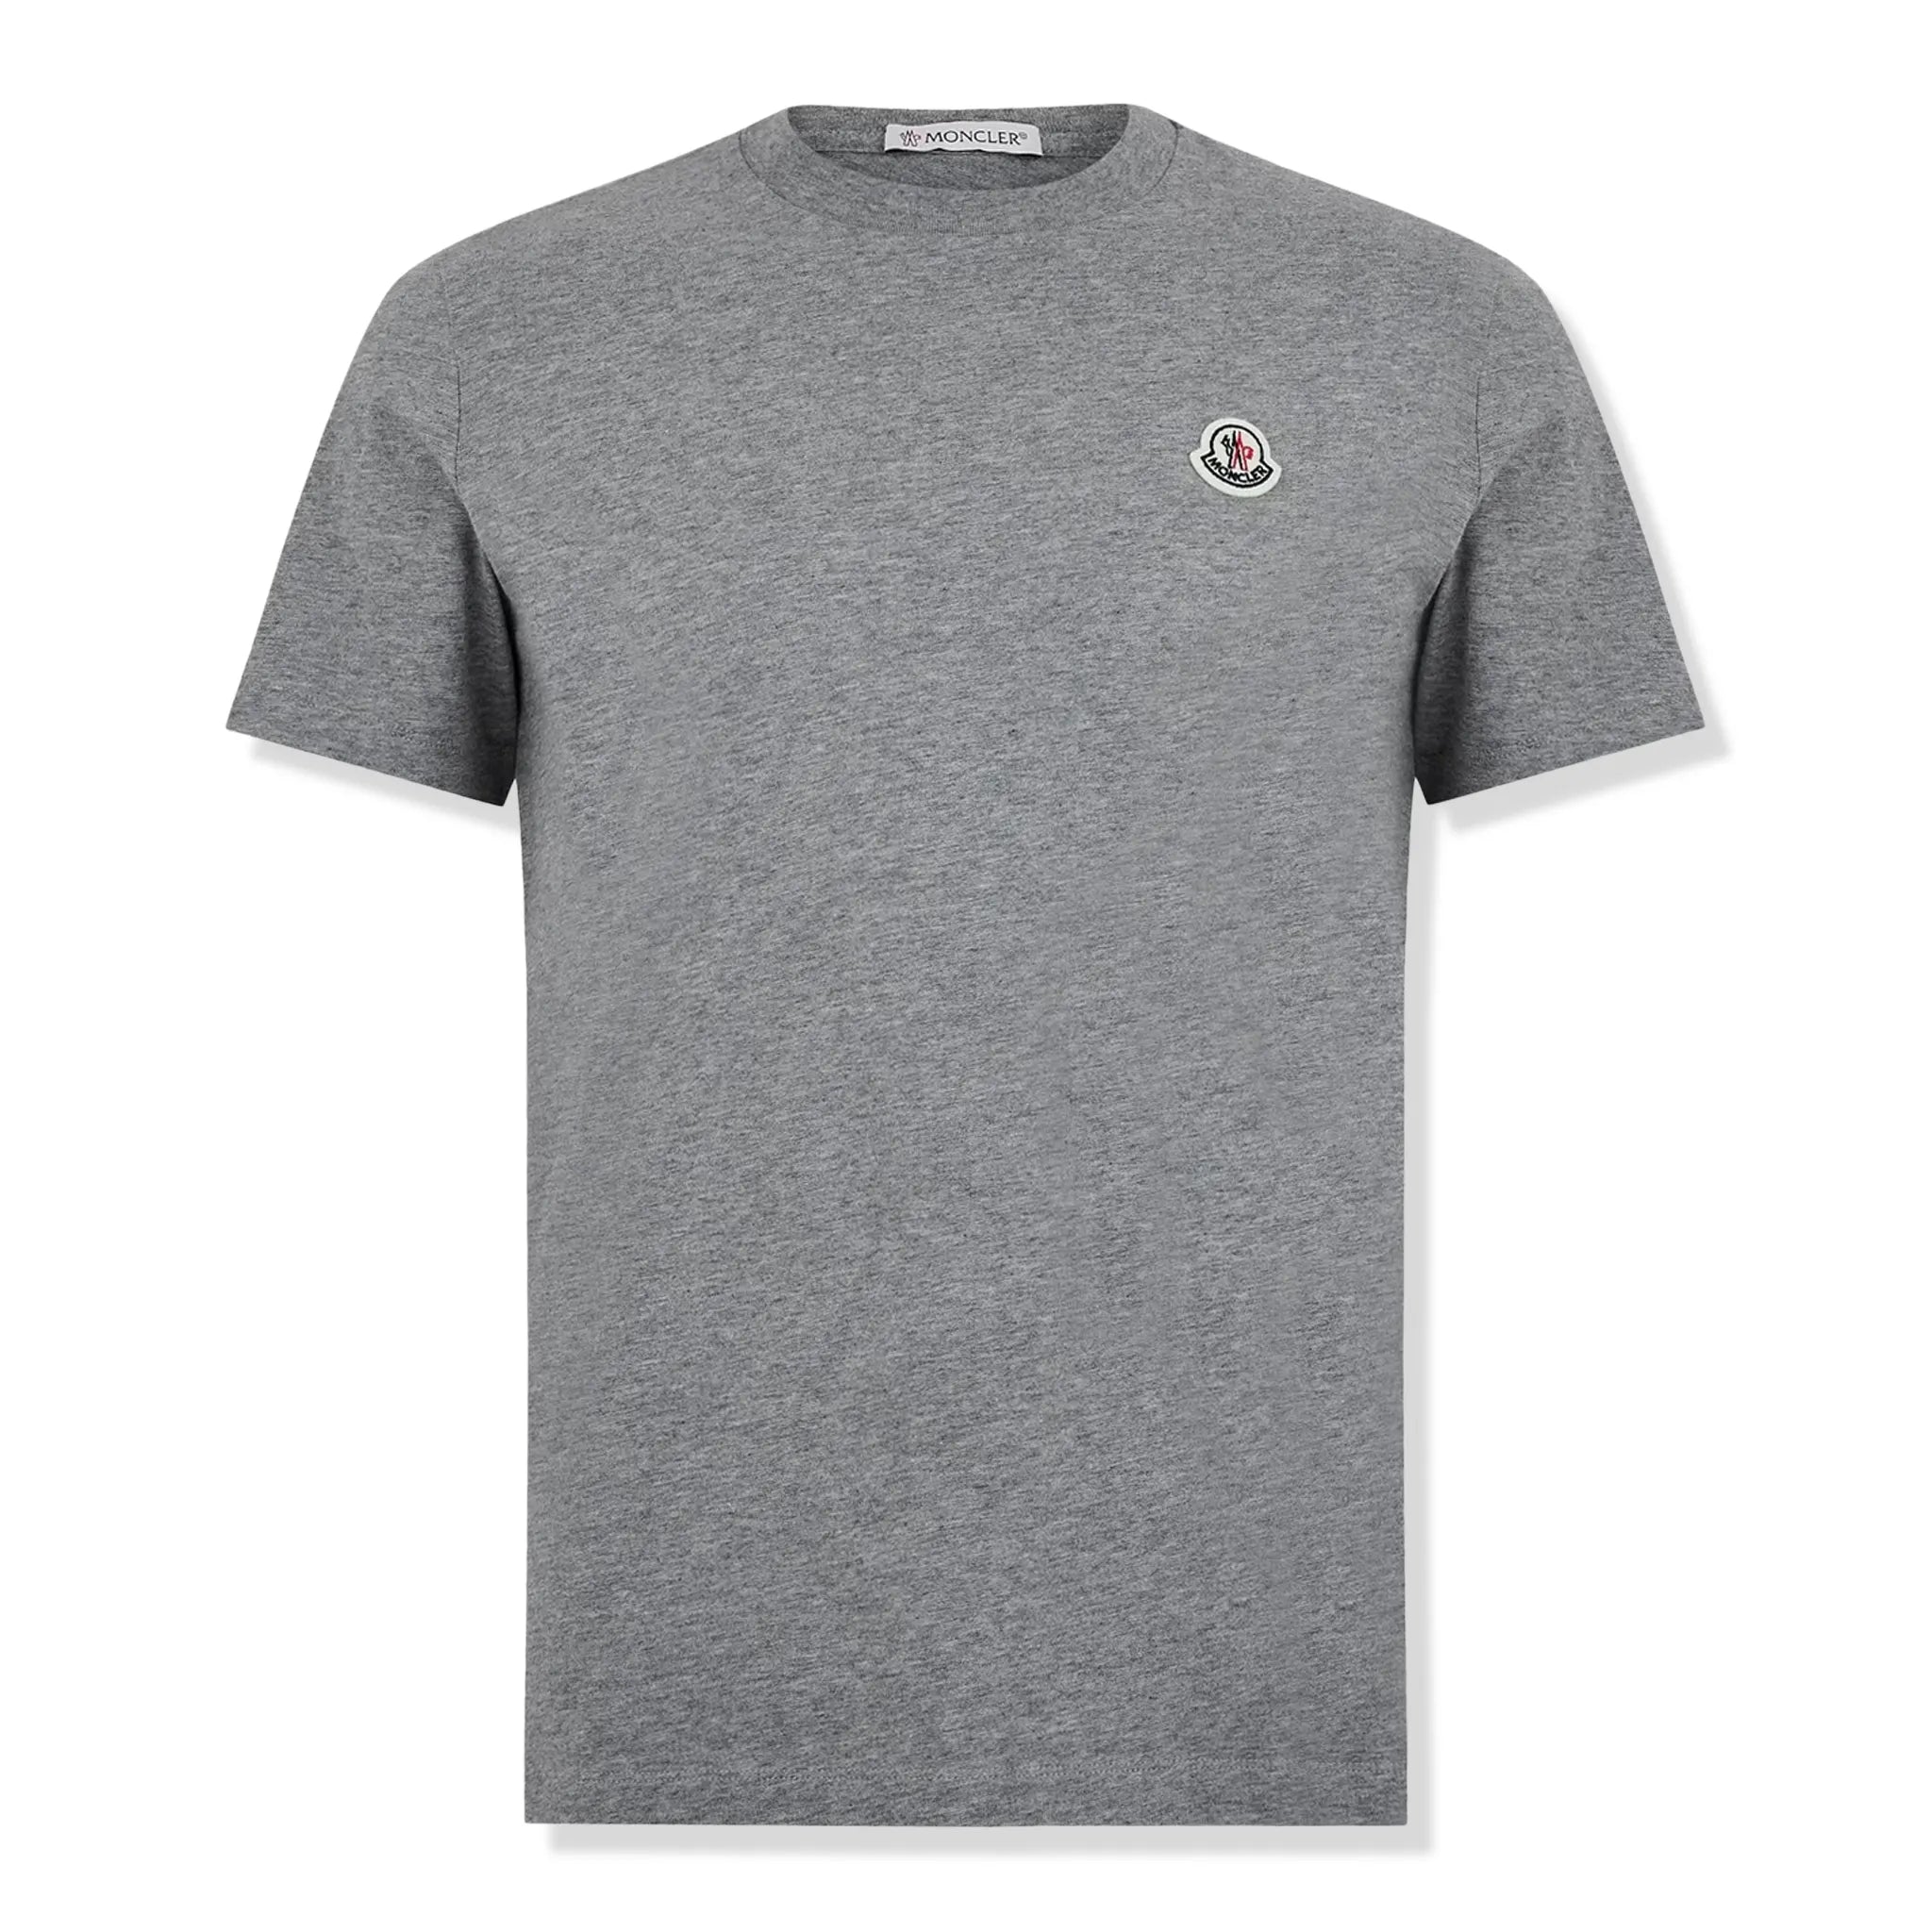 Grey Front view of Moncler SN00 3 pack Multi T Shirt J10918C00025829H8